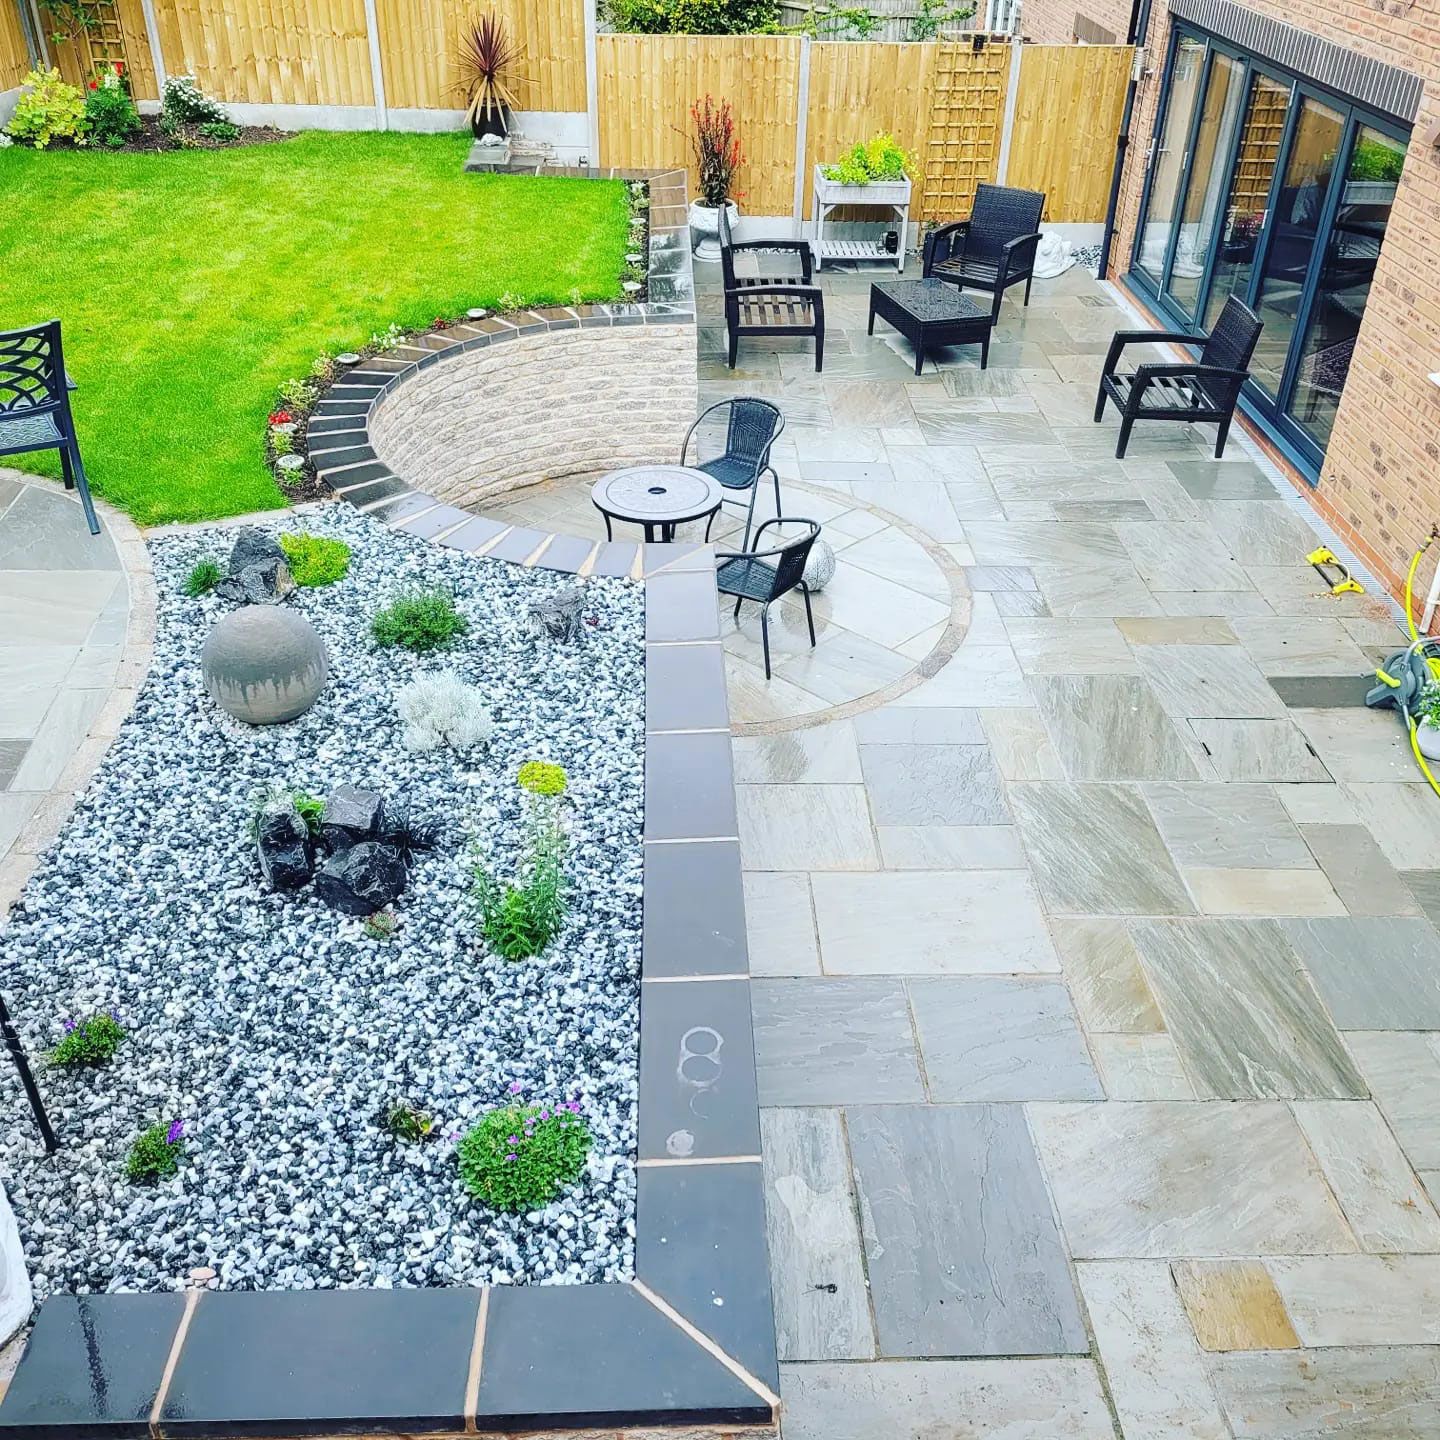 DNA Landscapes Ryton-on-Dunsmore Indian stone patio